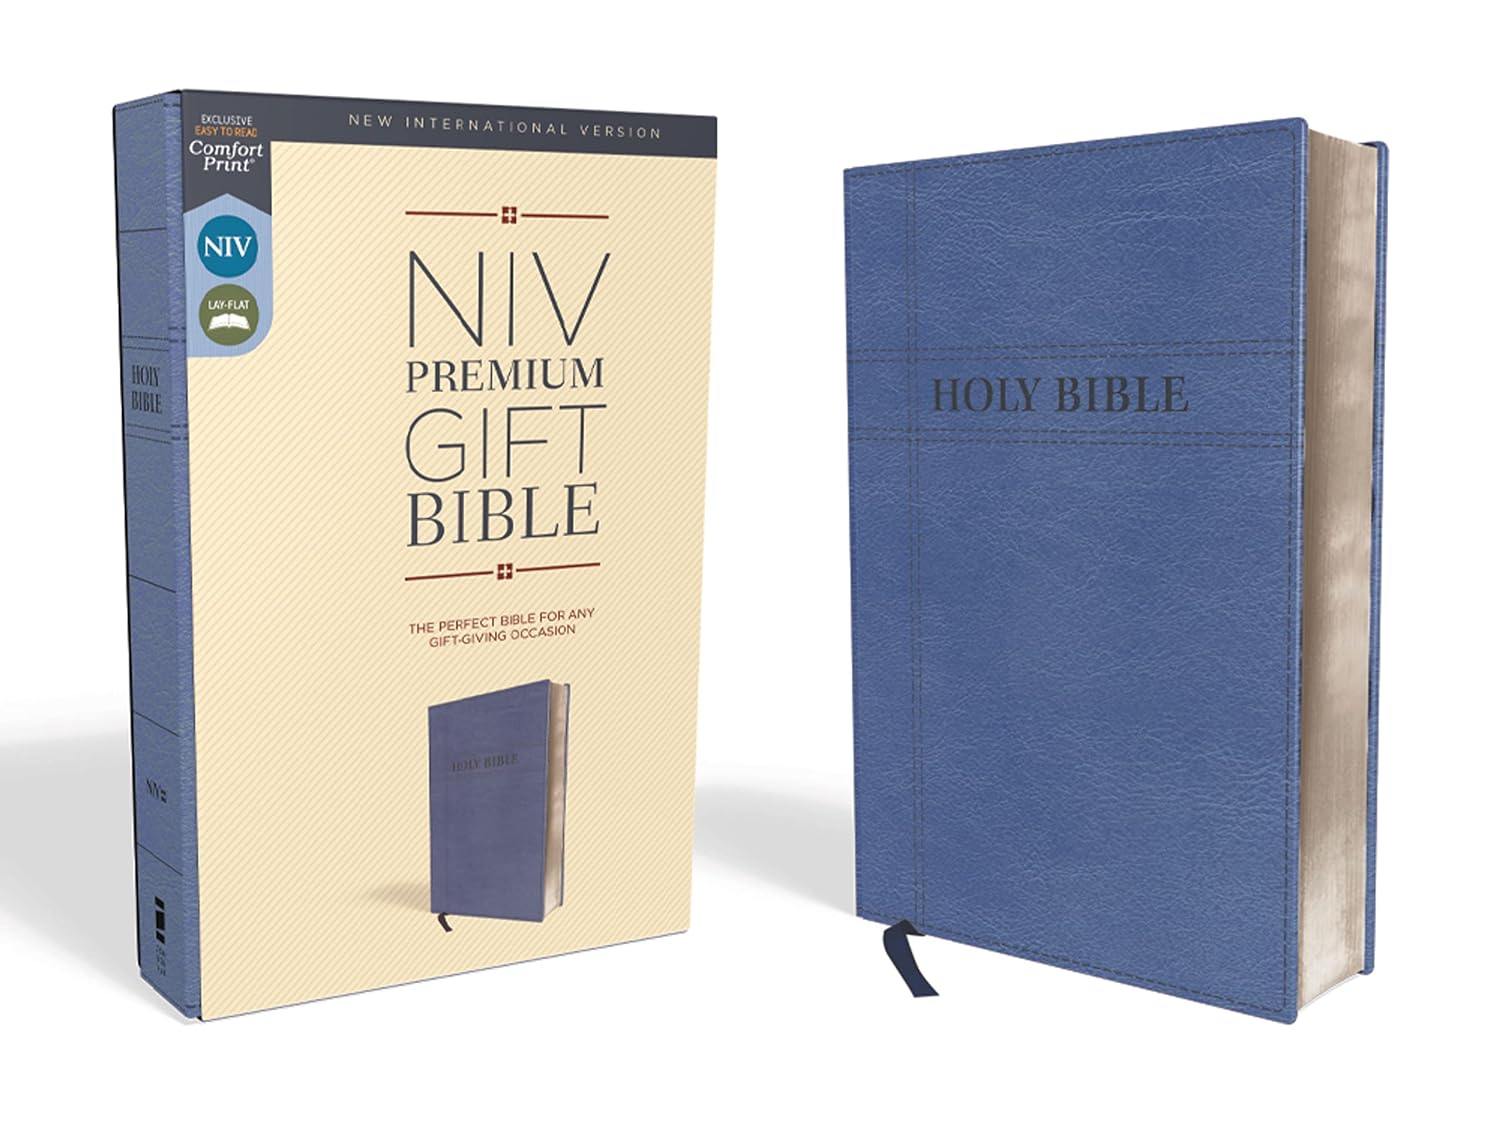 NIV Premium Gift Bible, Leathersoft, Navy, Red Letter, Comfort Print